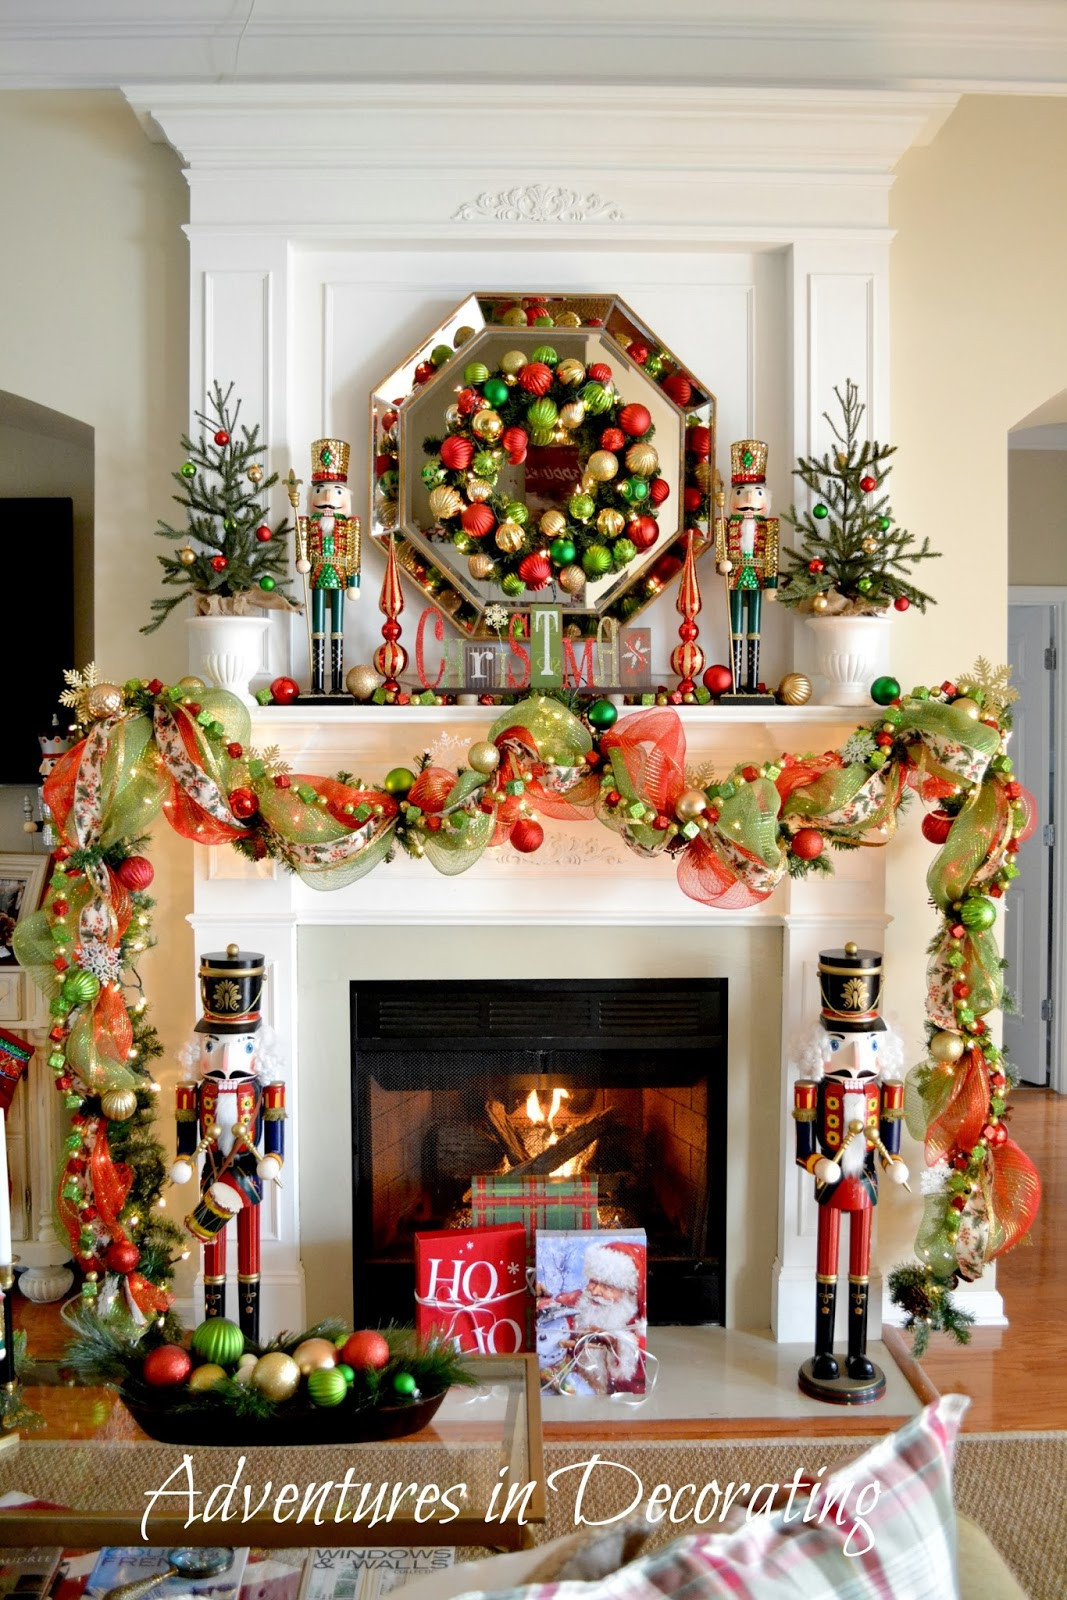 Decorate Fireplace For Christmas
 Adventures in Decorating Our Christmas Mantel and "Deck